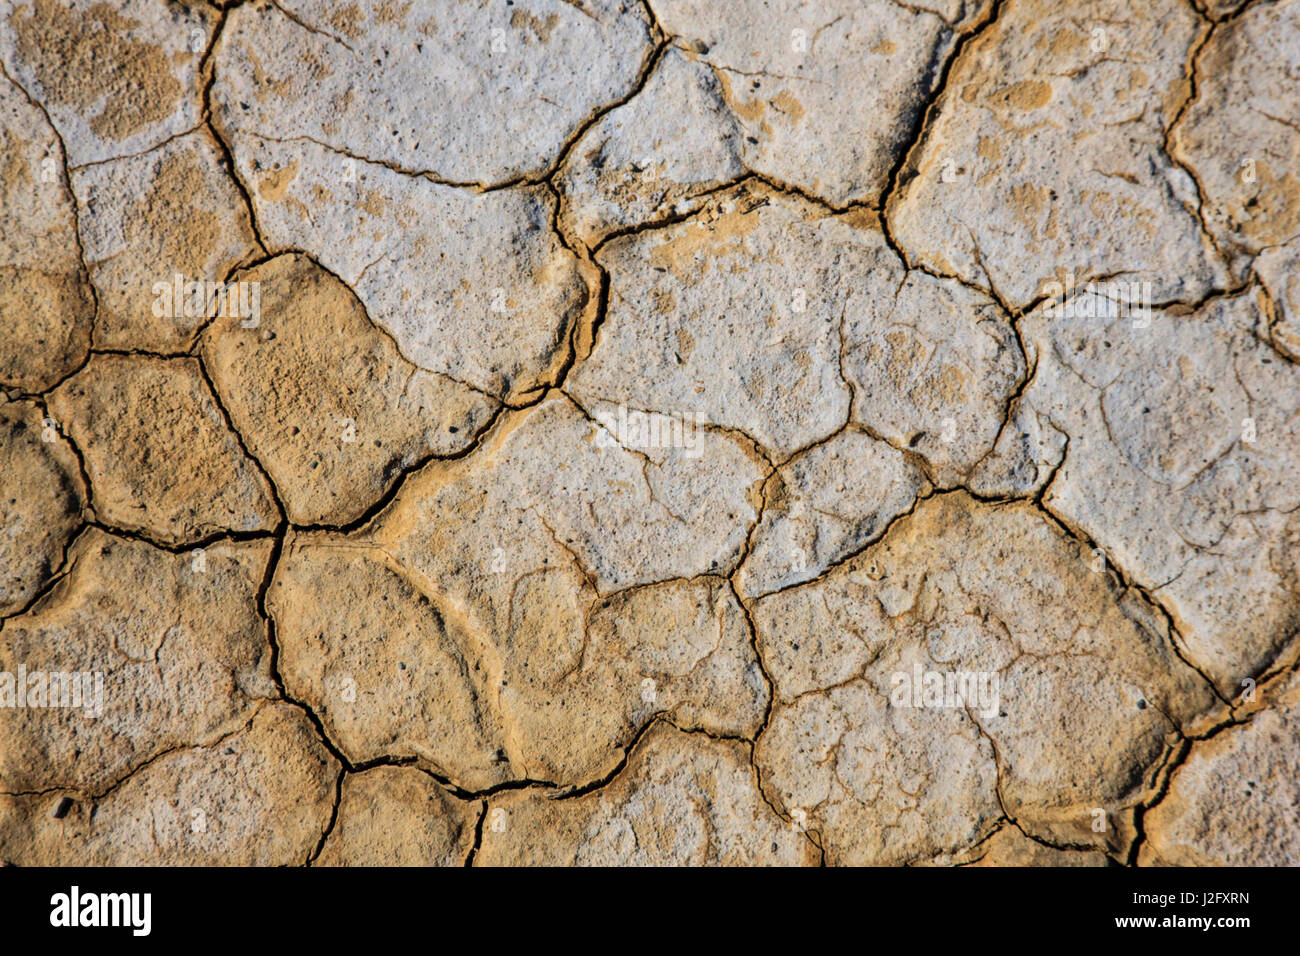 Detail shot of cracked earth covered with salt. Stock Photo